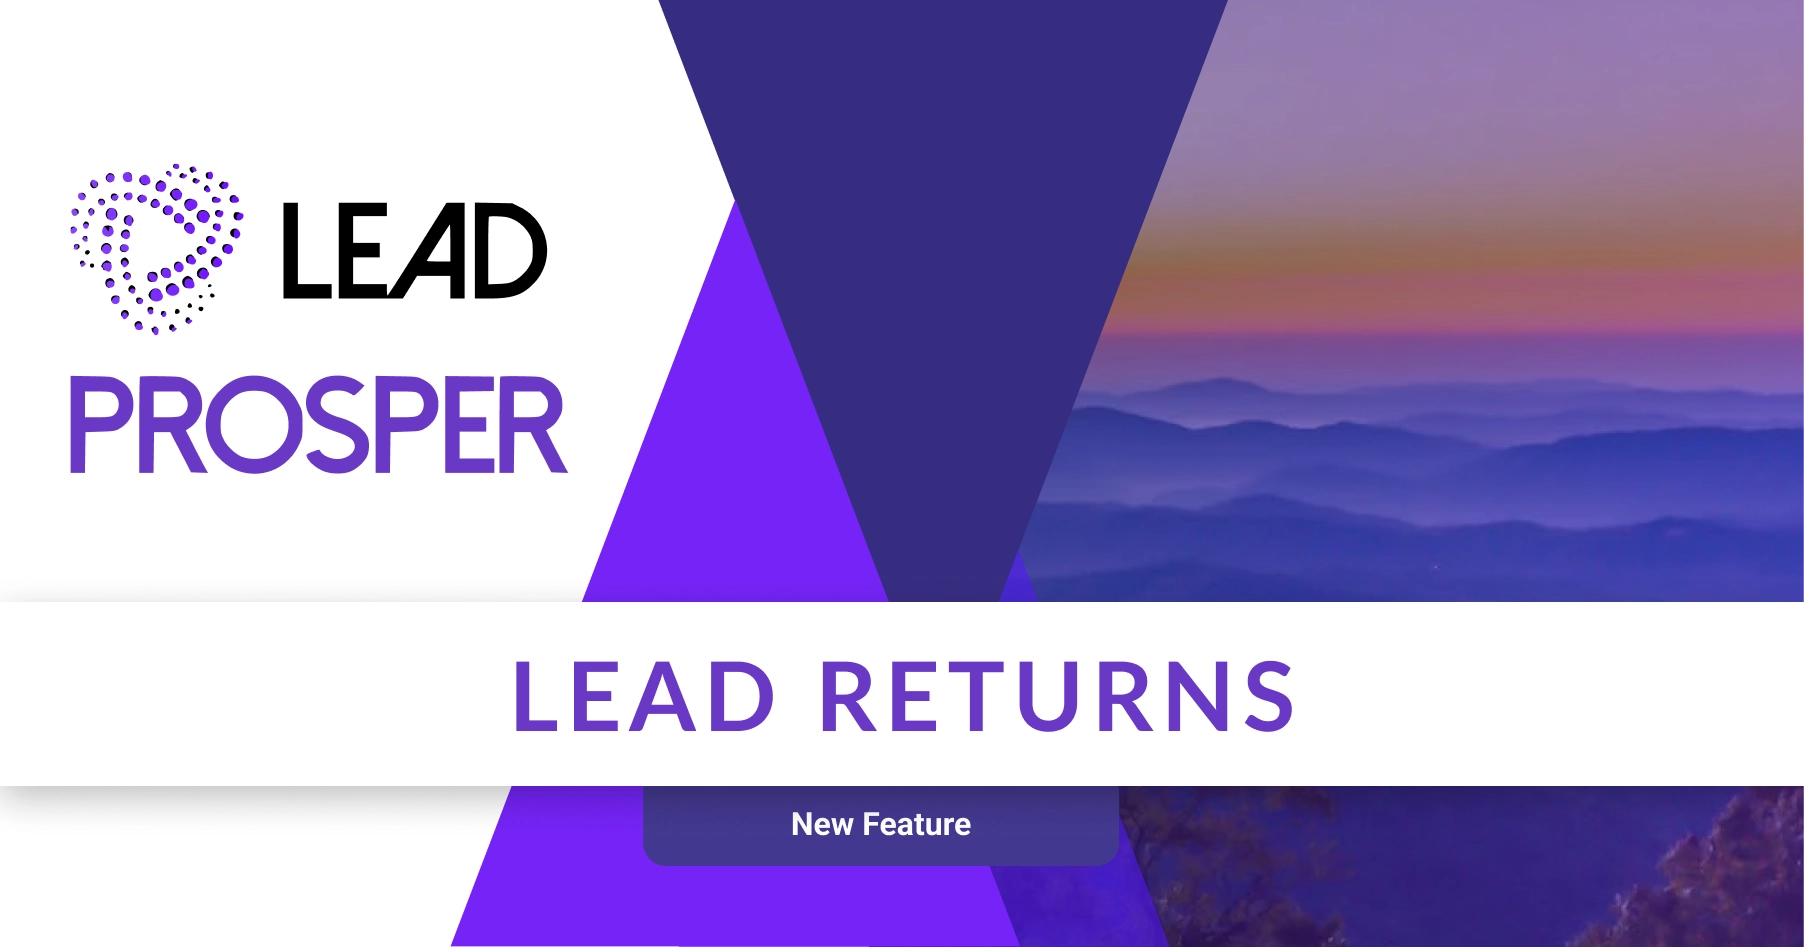 New Feature: Lead Returns